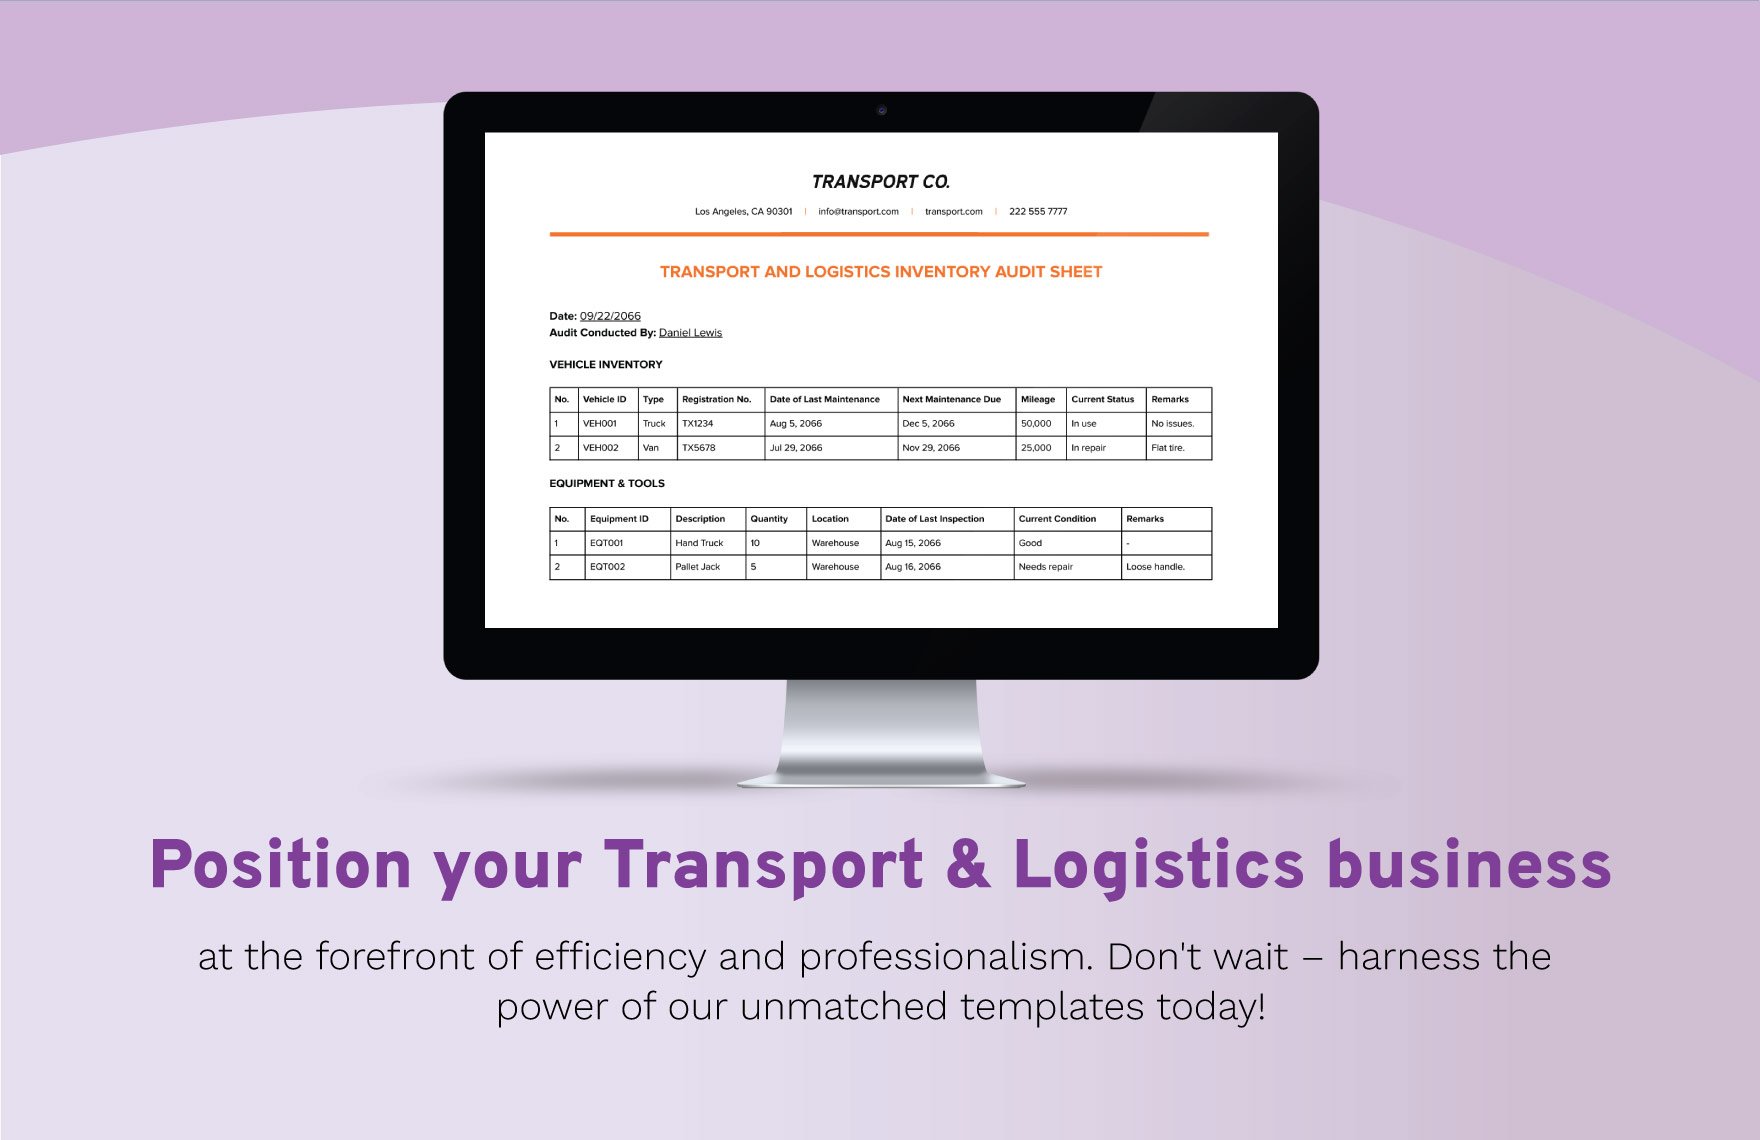 Transport and Logistics Inventory Audit Sheet Template